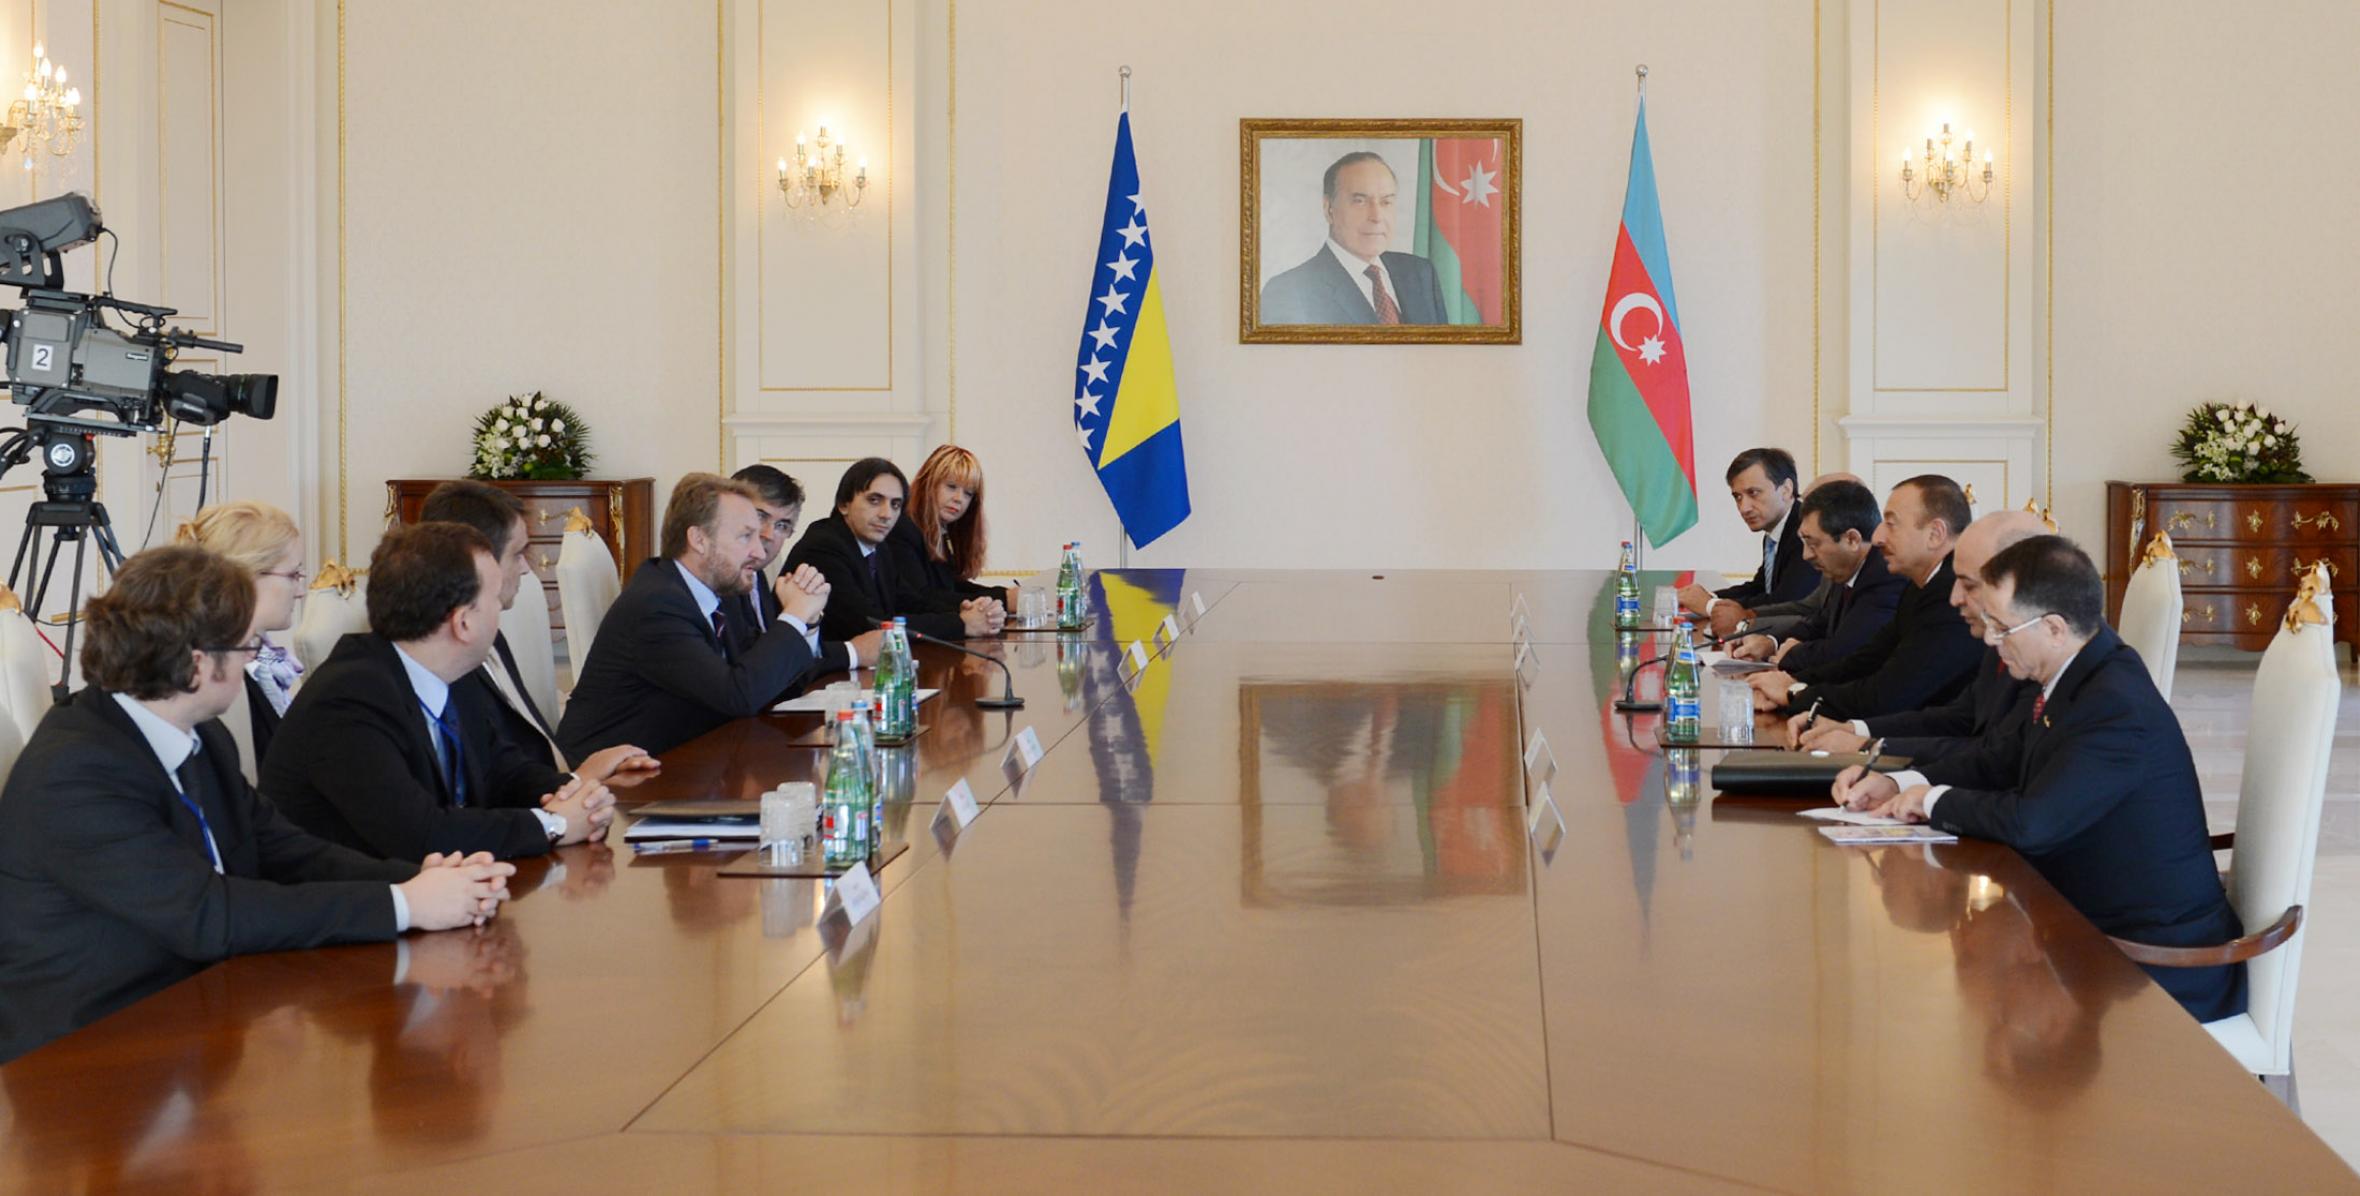 Meeting of Ilham Aliyev and Chairman of the Presidency of Bosnia and Herzegovina Bakir Izetbegovic in an expanded format was held